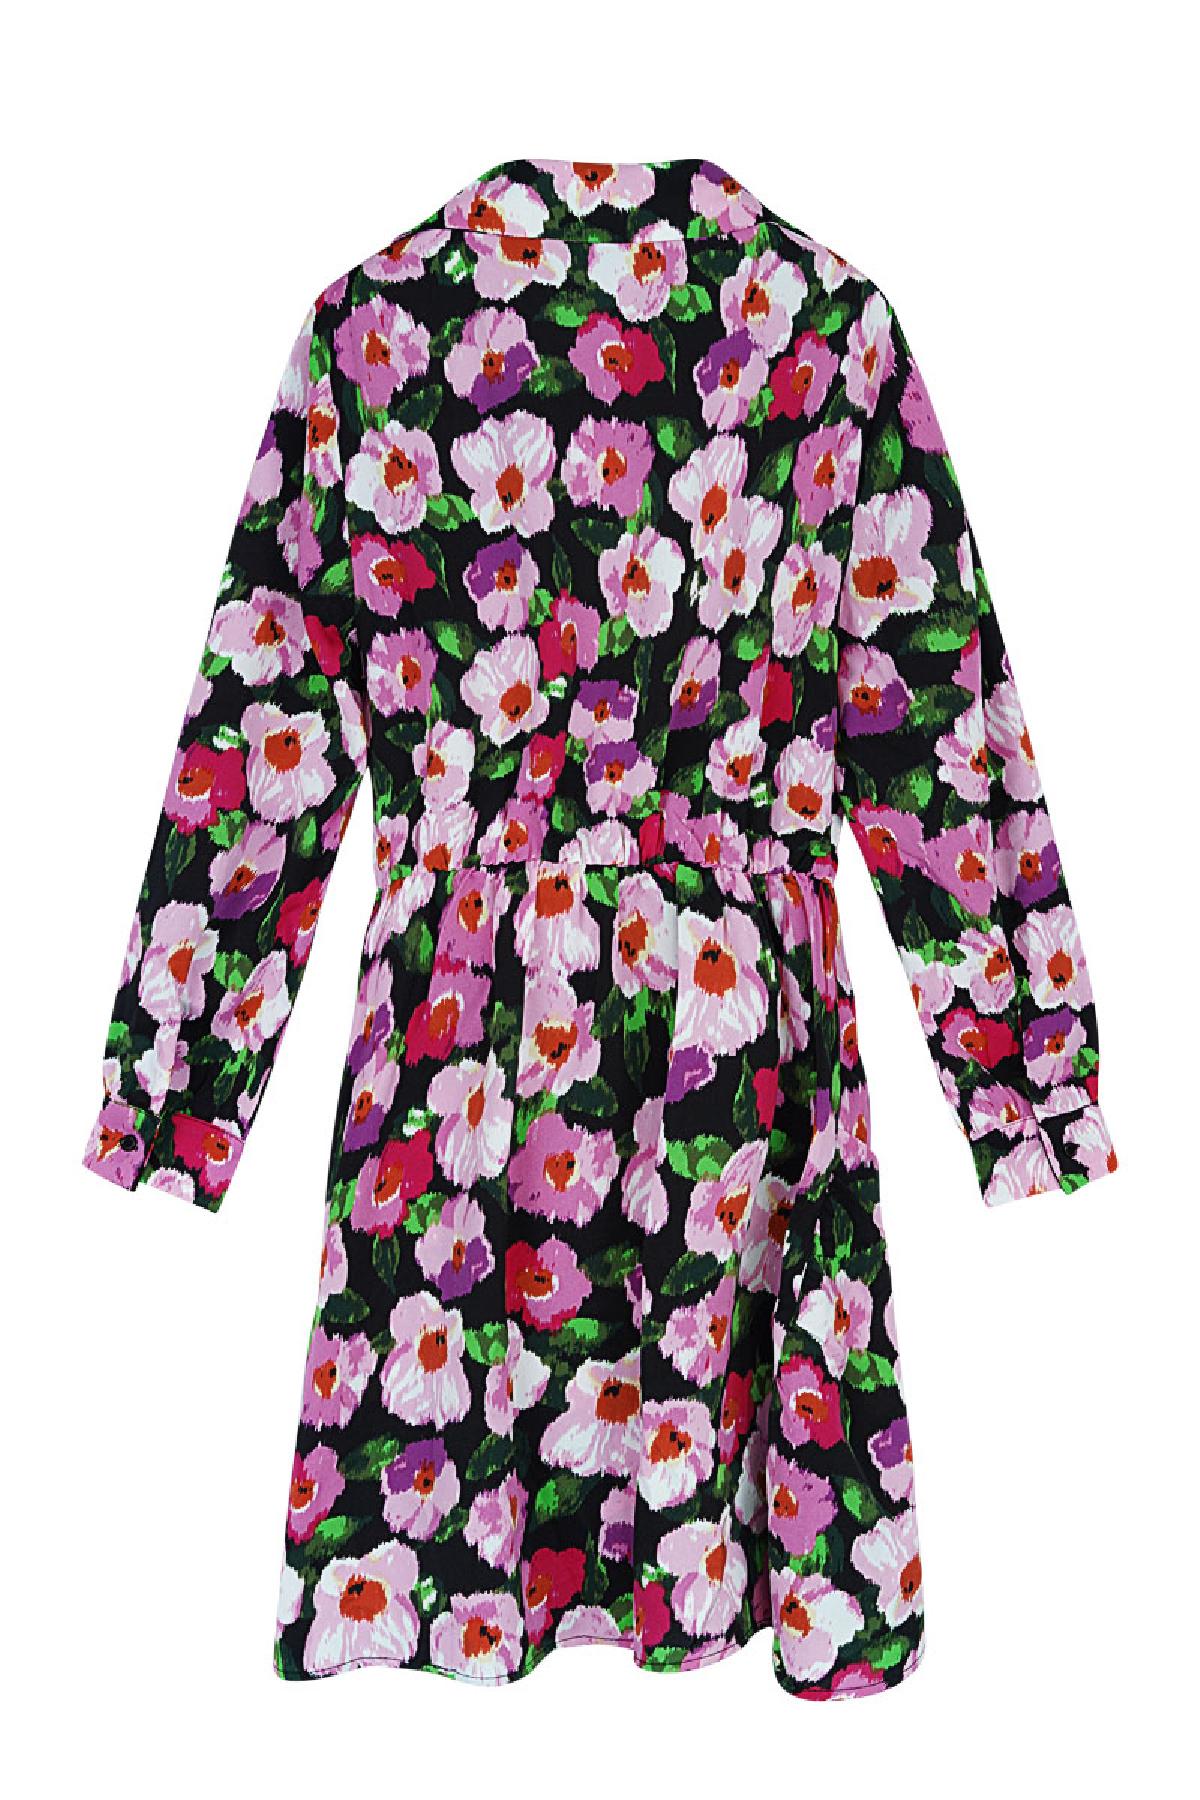 Flower print dress with button detail Black Multi S Picture3